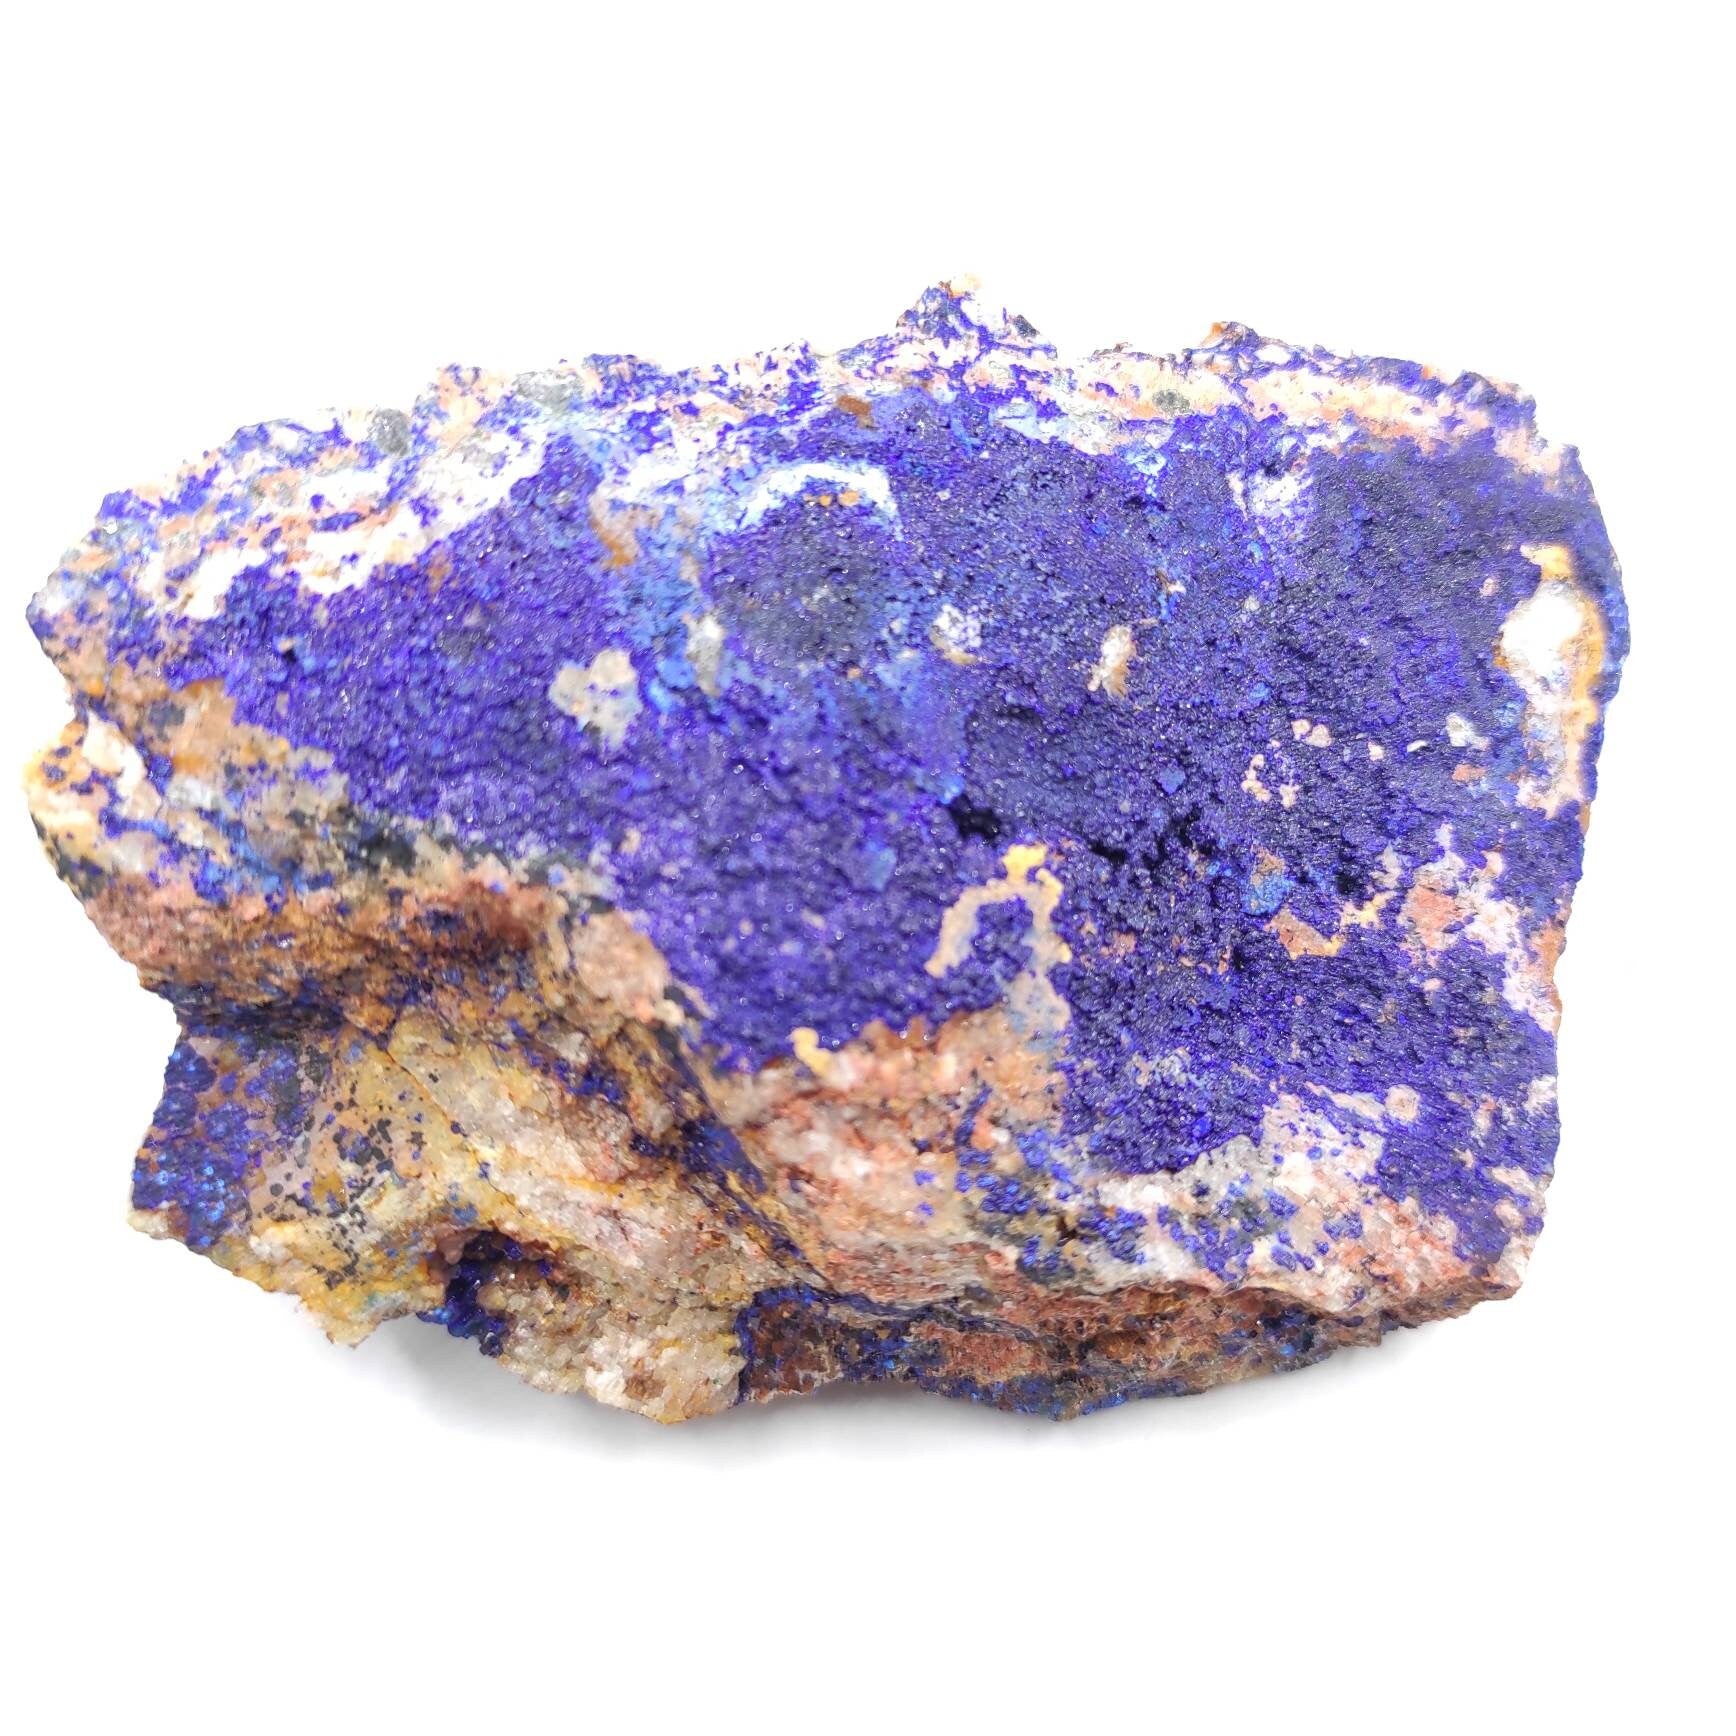 486g - Large Azurite Crystal Specimen - Blue Azurite from Sidi Ayad, Morocco - Natural Raw Azurite Mineral - Rough Azurite Healing Crystal